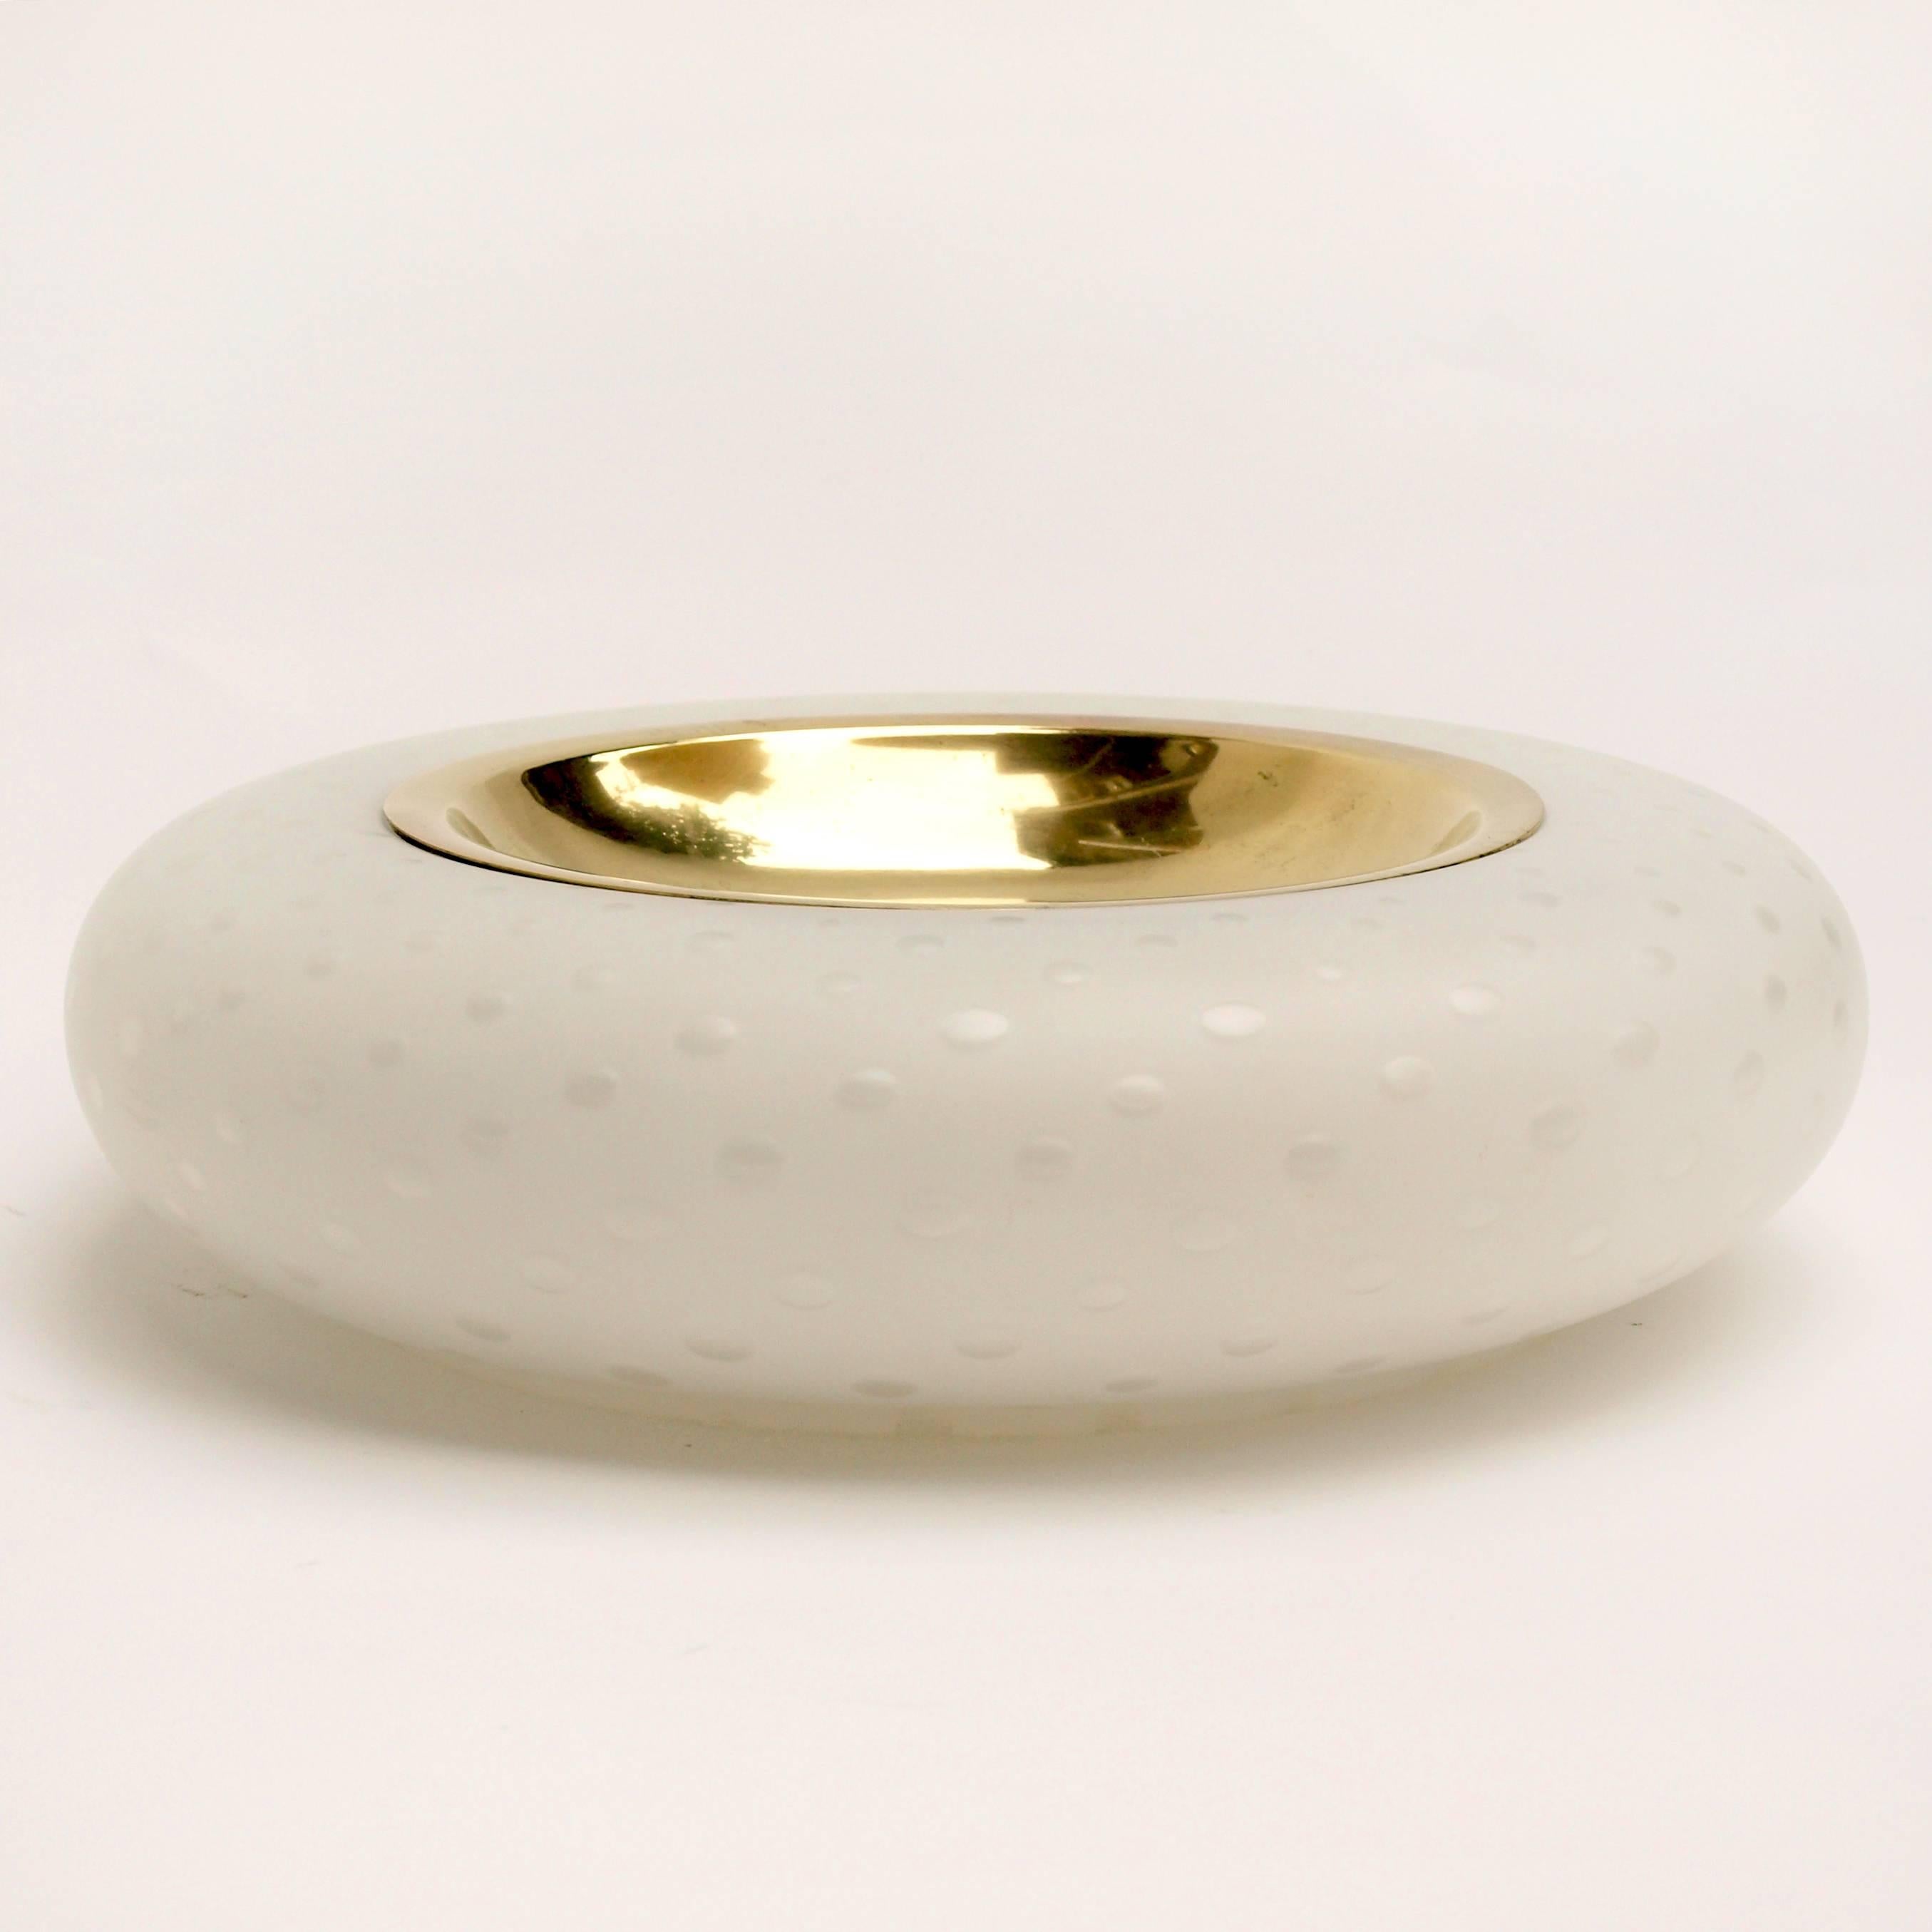 A large circular ashtray or bowl by Tommaso Barbi in brass and white polka-dot matte Murano glass.